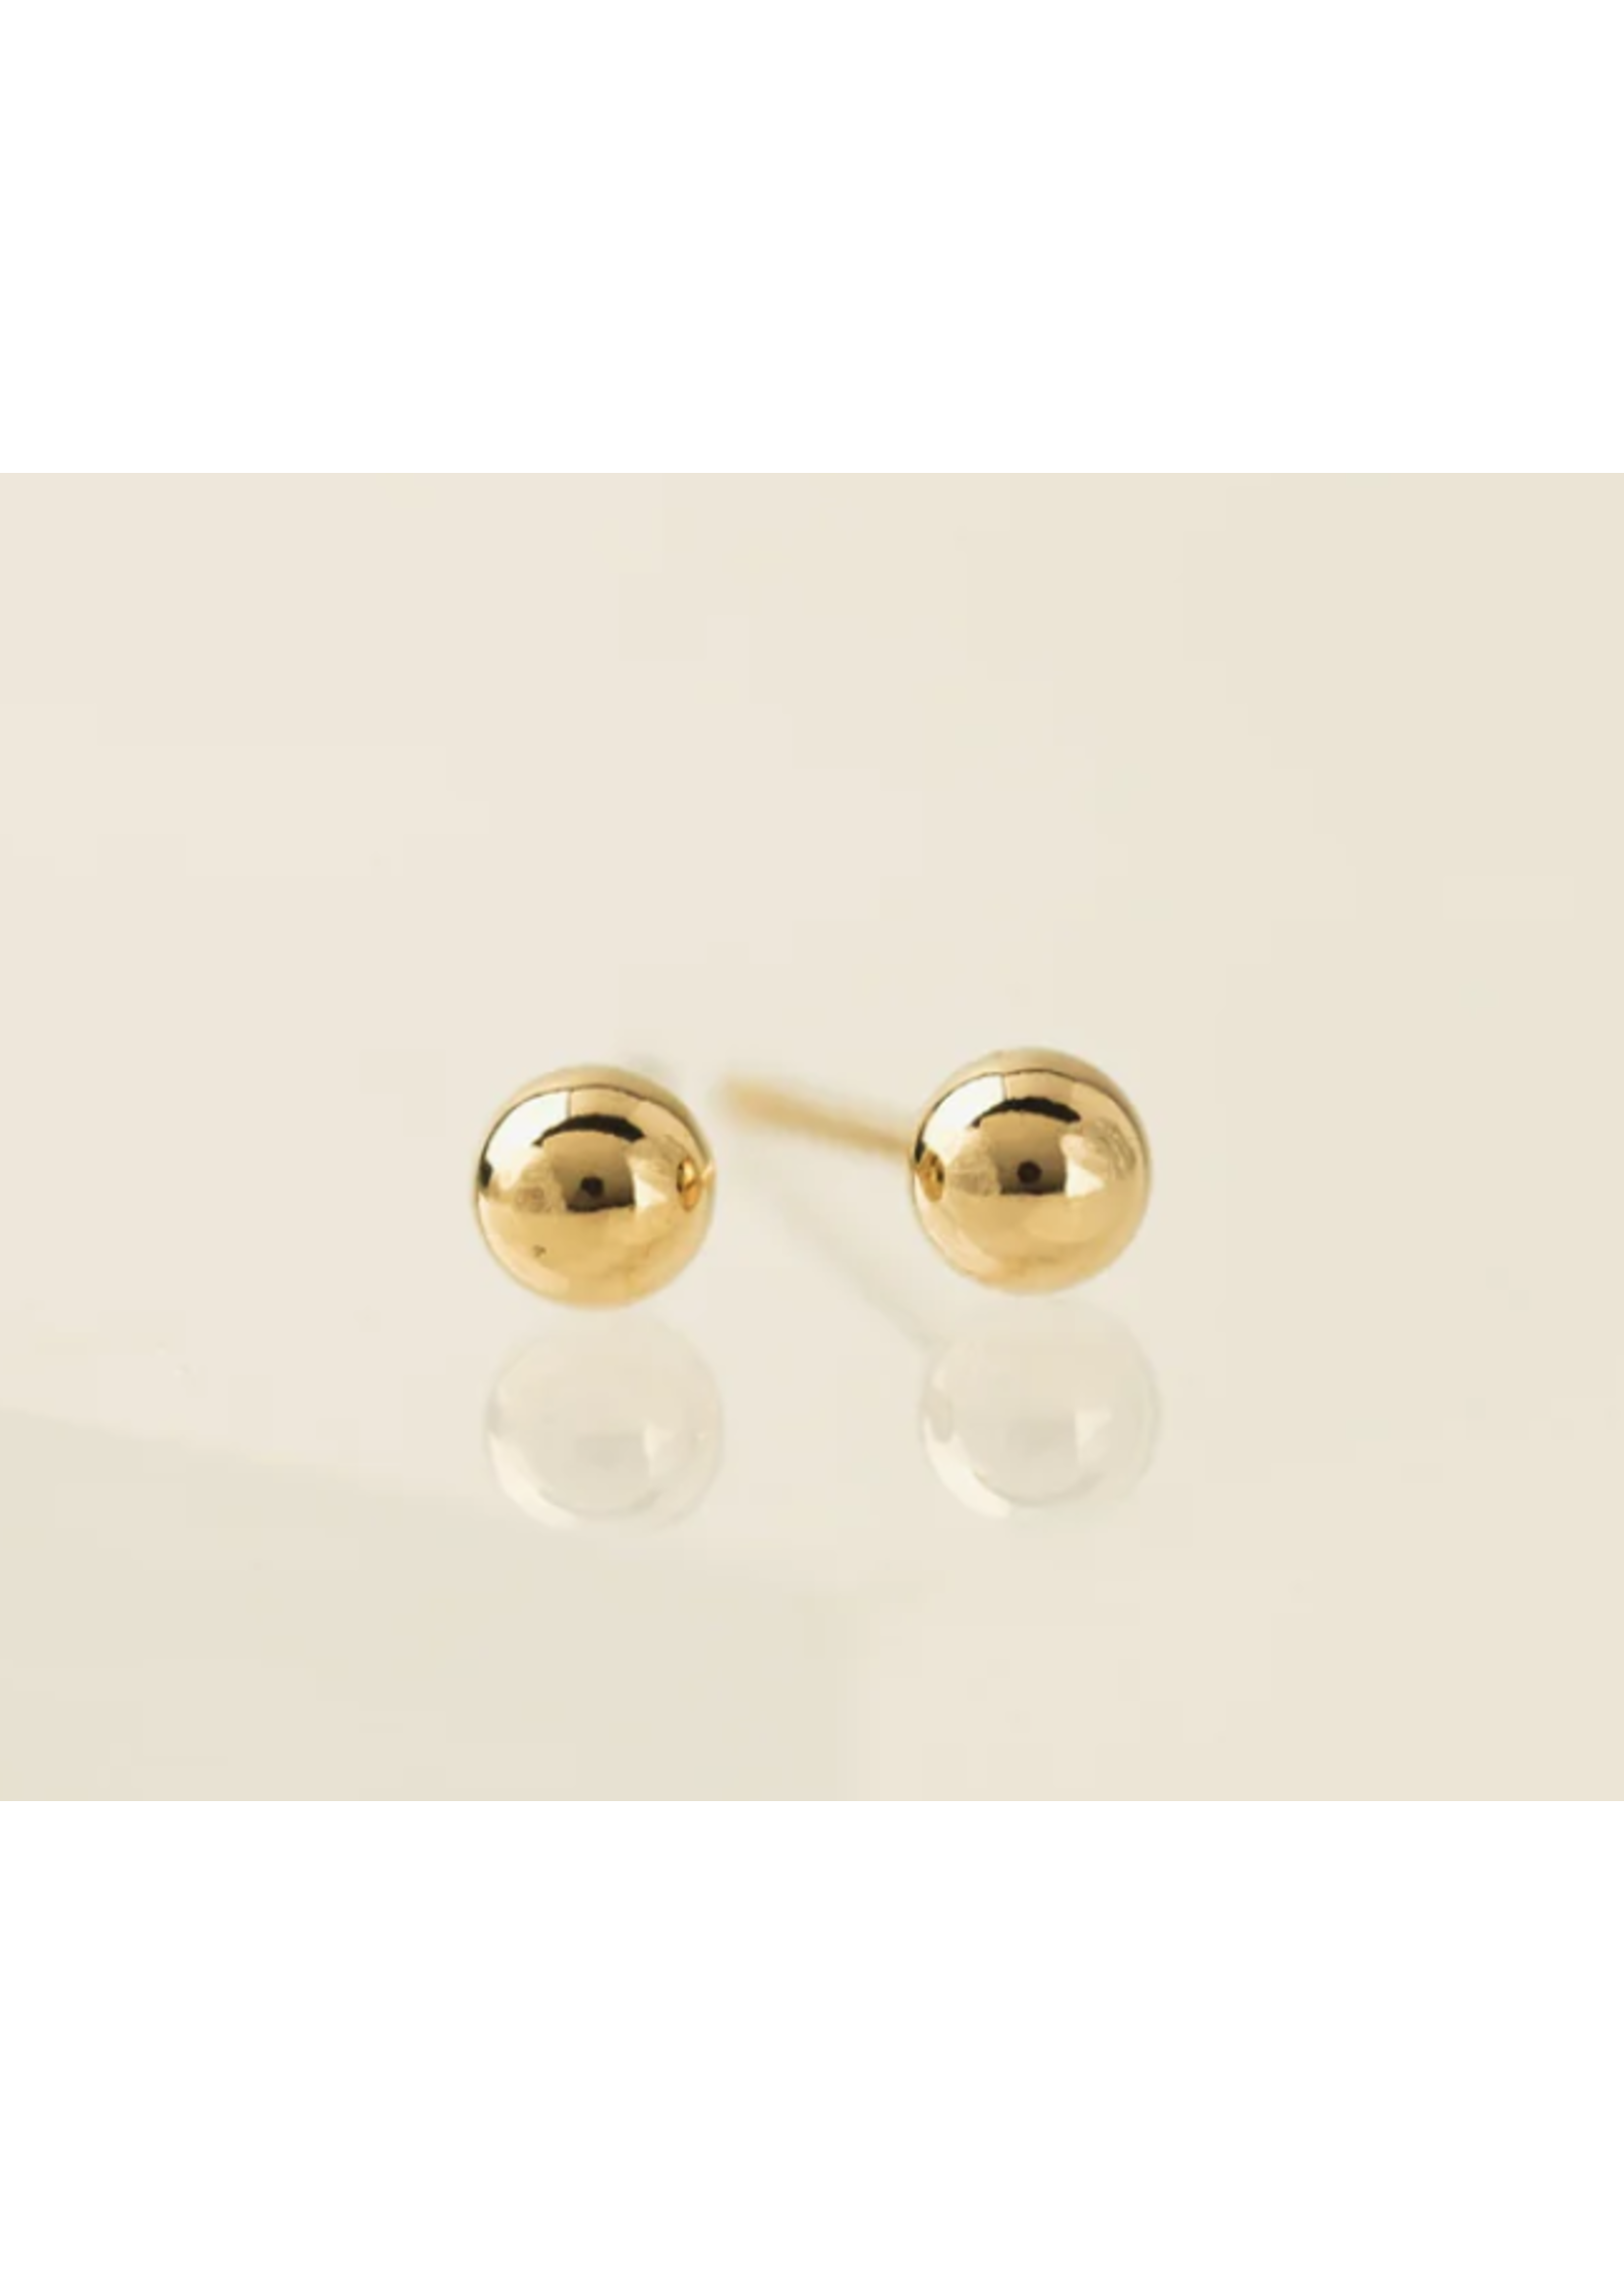 LOVER'S TEMPO 4MM BALL- GOLD FILLED STUD